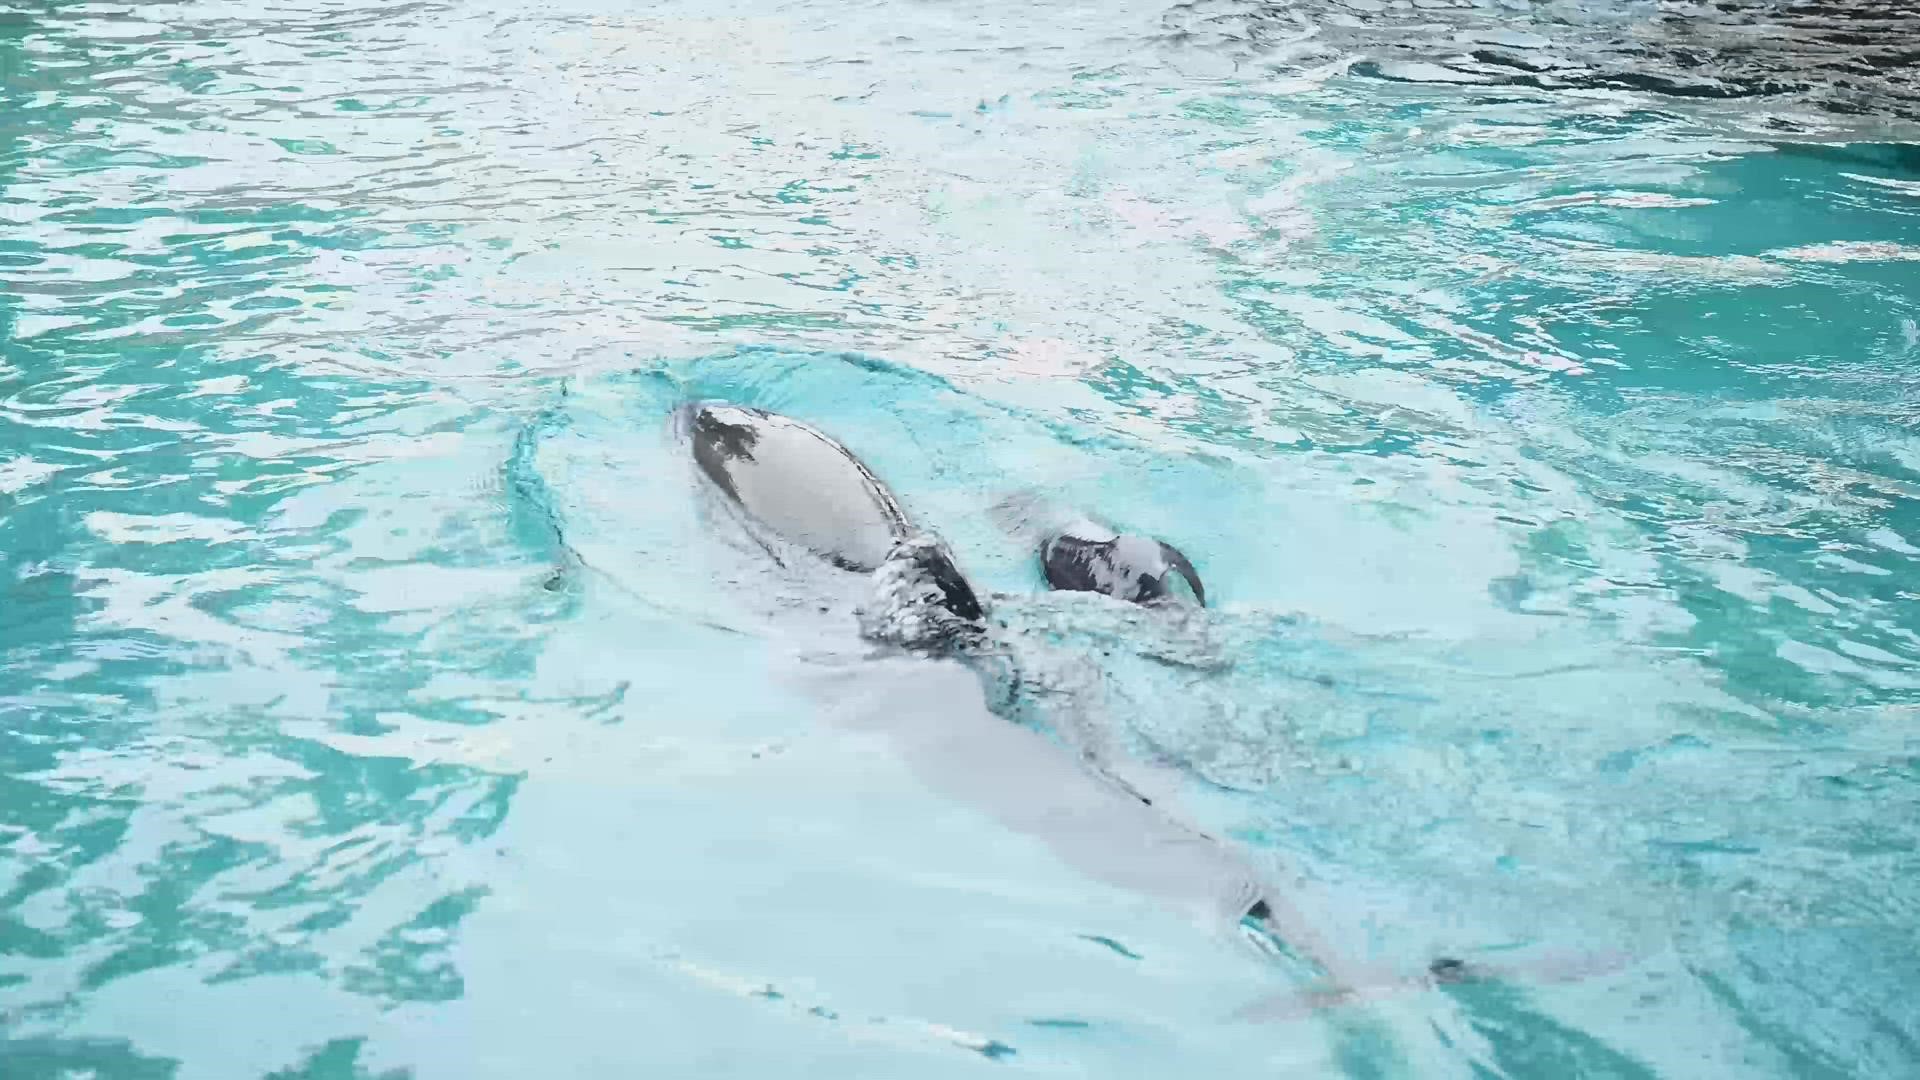 Baby Moby is seen swimming with his mother after being born on June 26 to proud parents Starbuck and Nueces.